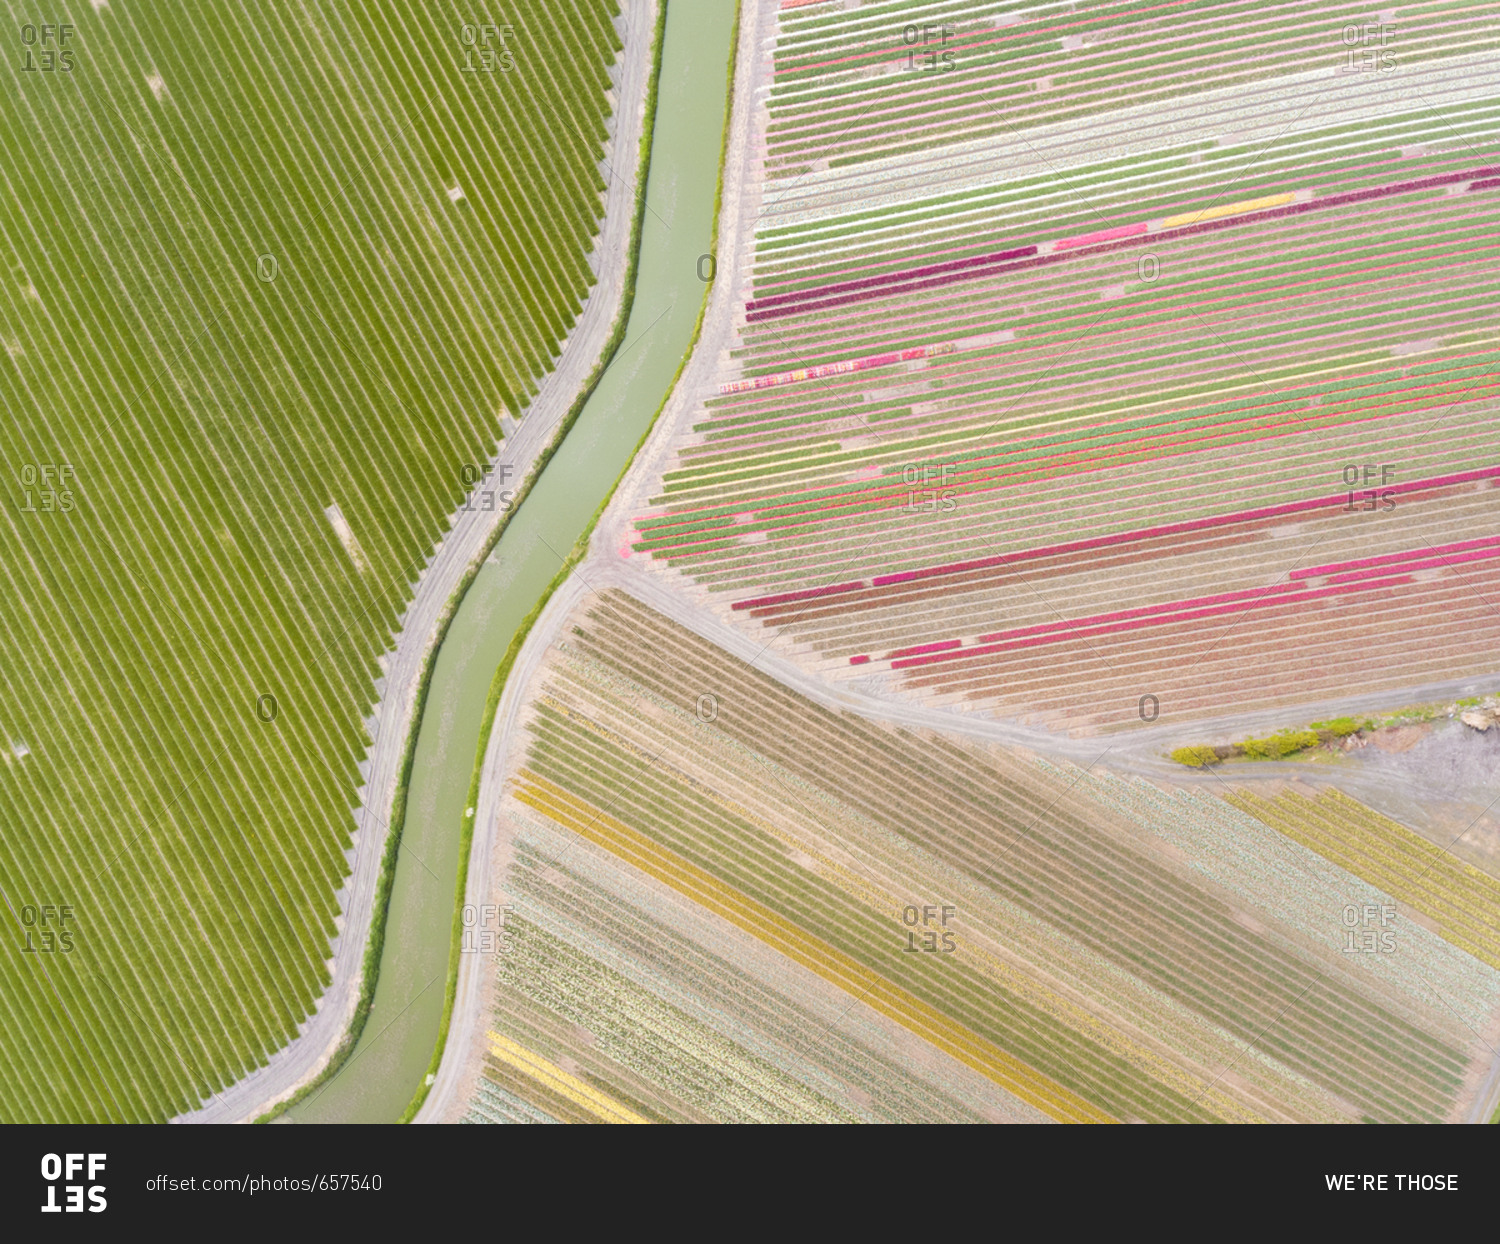 Aerial photography of  colorful tulips fields in Voorhout, Zuid-holland, the Netherlands.